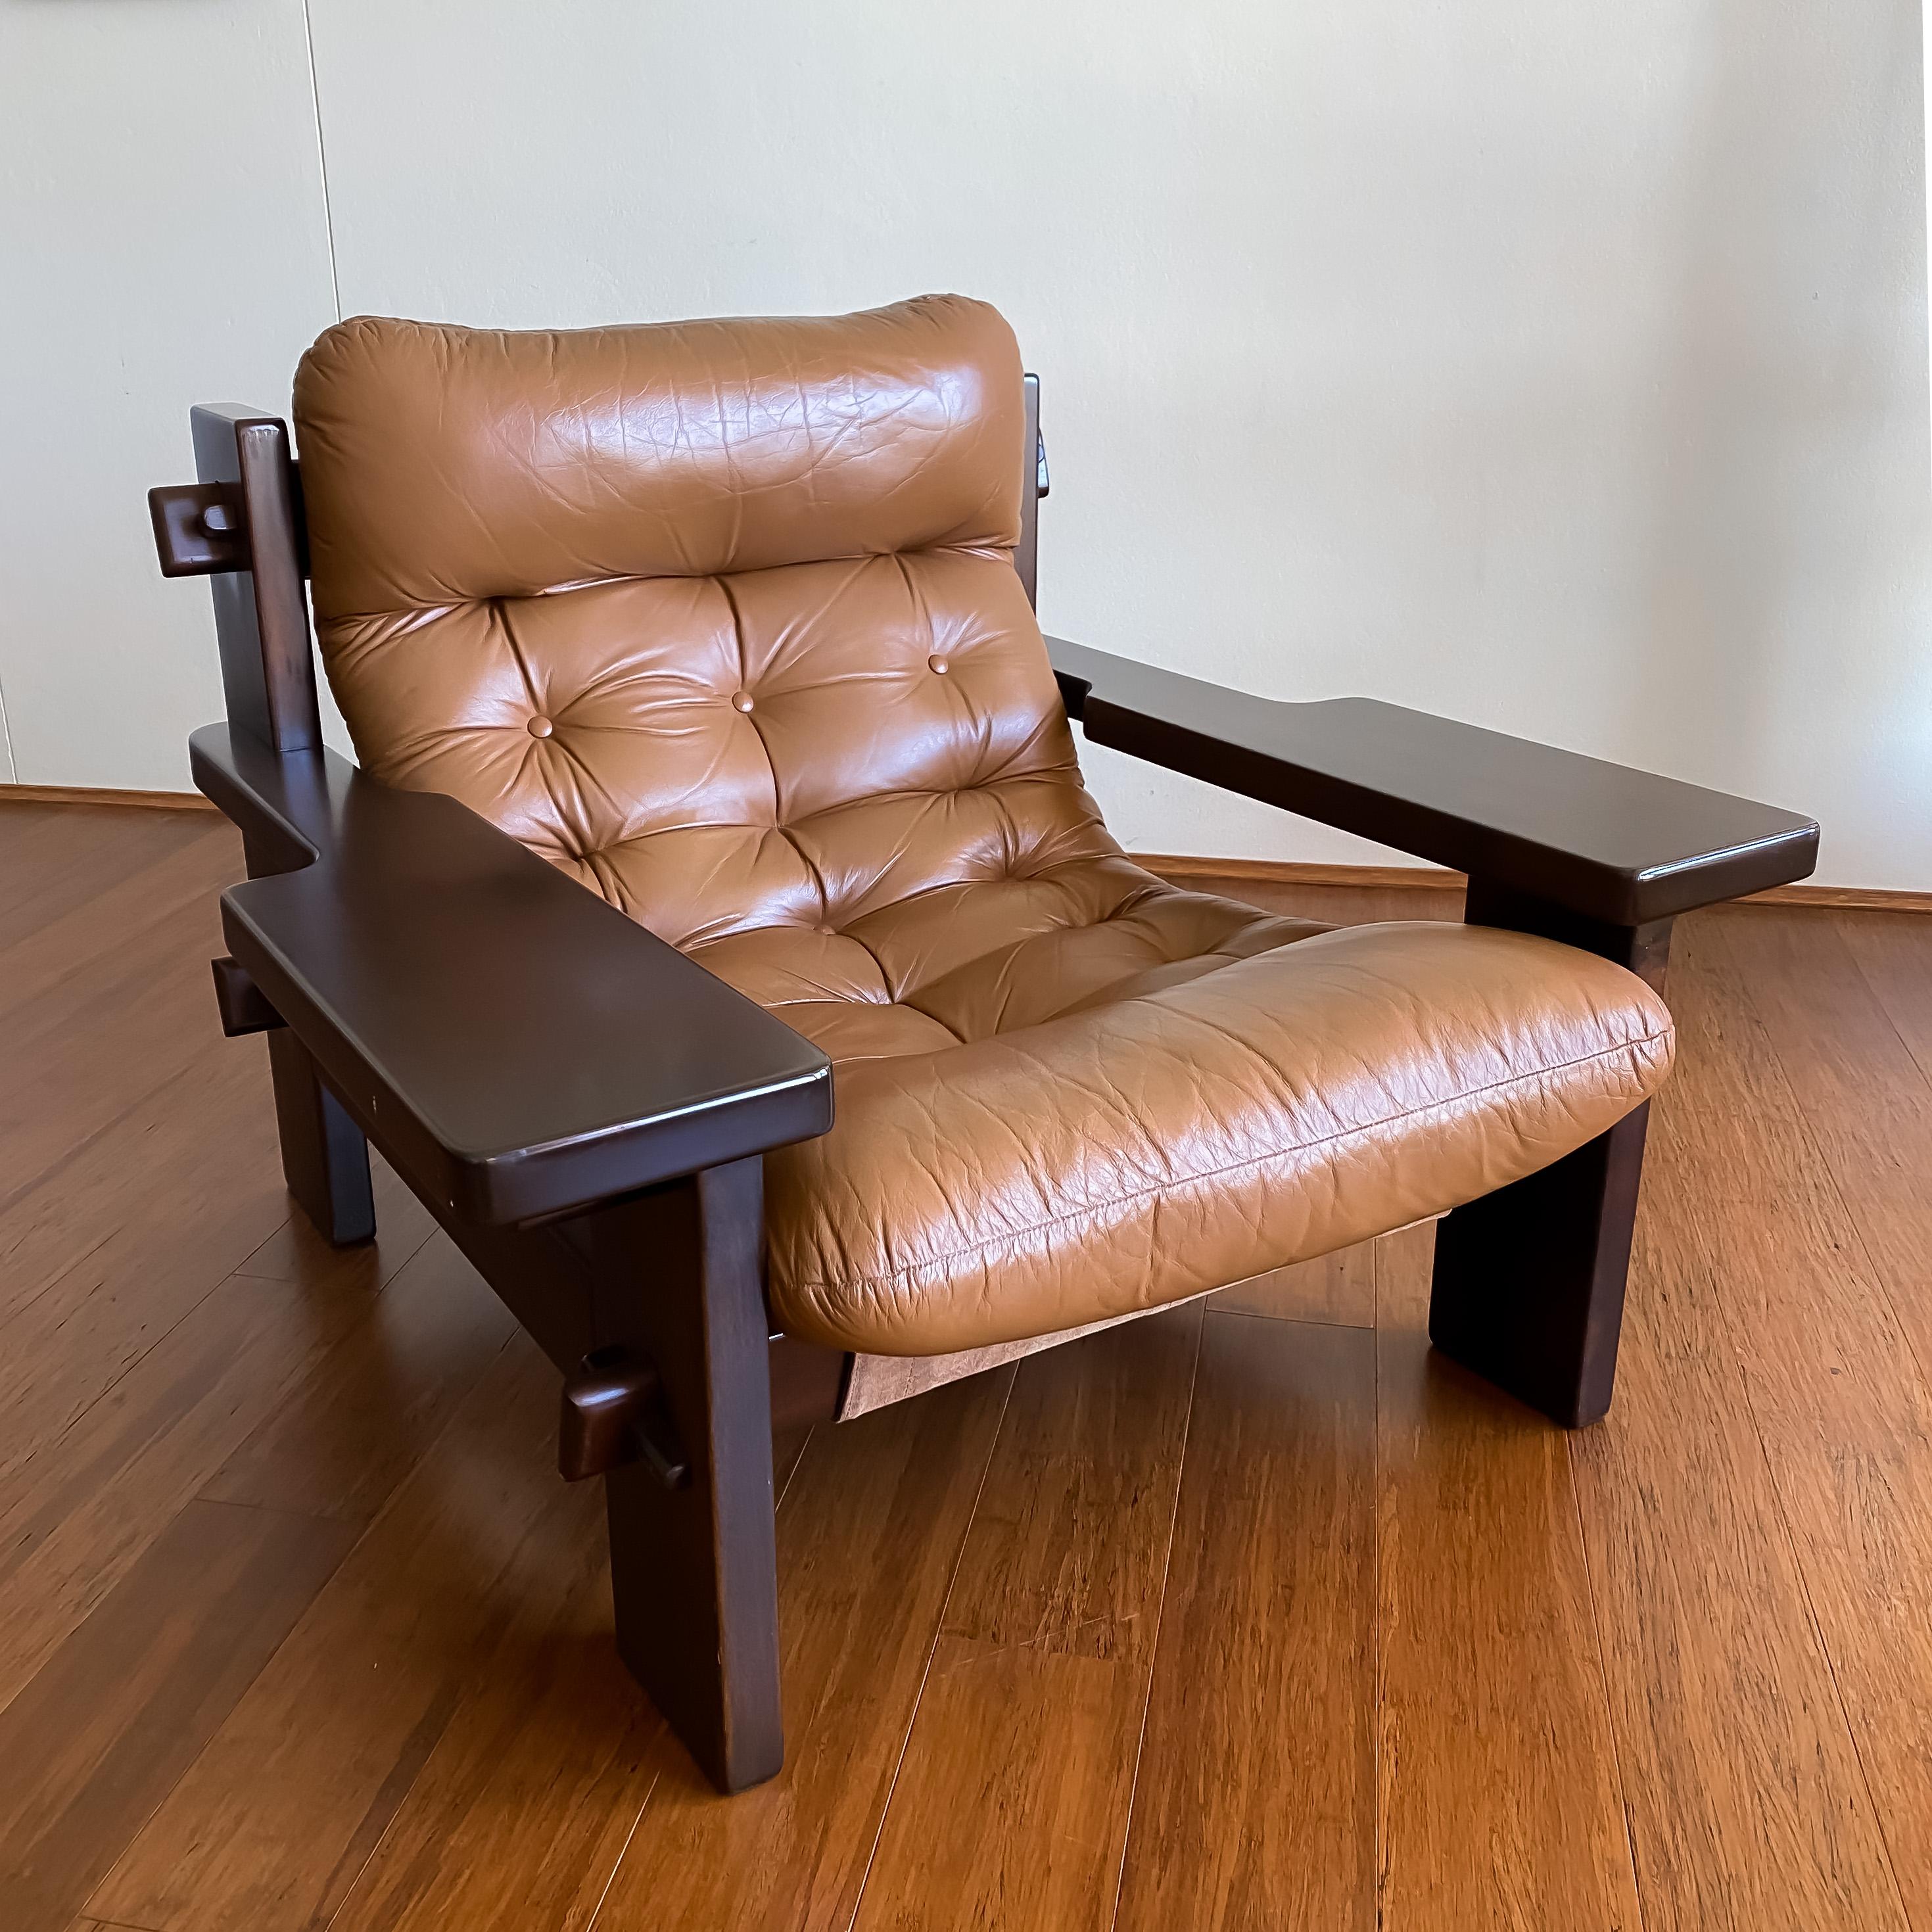 Set of Mid-Century Jean Gillon Large-scale Lounge Armchairs for Probel.

A masterpiece with simple lines and pegged construction creating an elegant and sophisticated look. 

Solid Jacaranda wood frame with leather upholstered cushions. In good